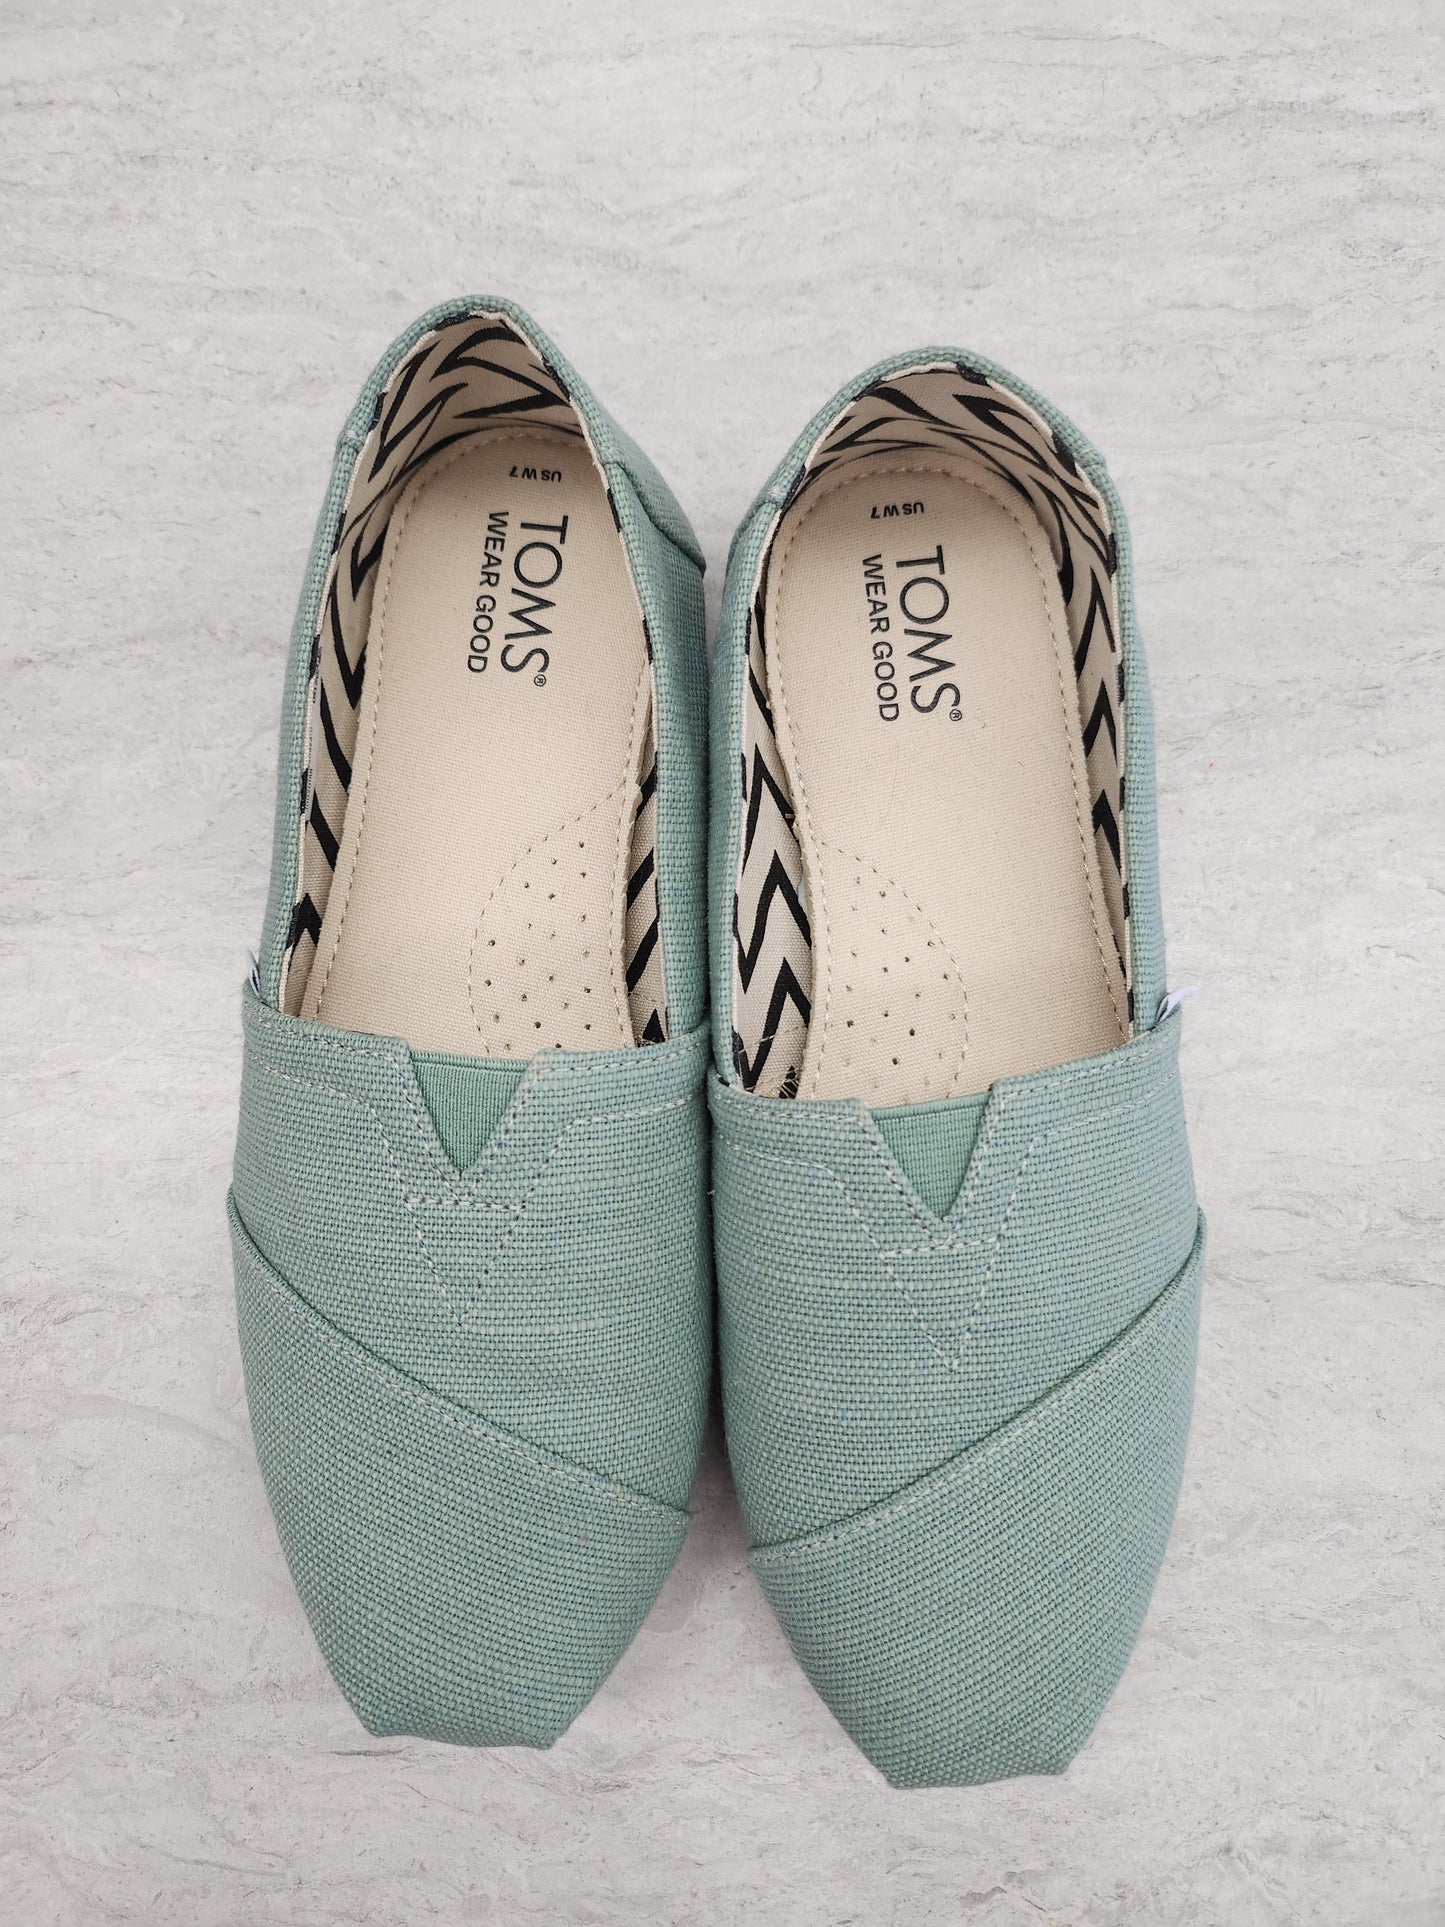 Green Shoes Flats Toms, Size 7